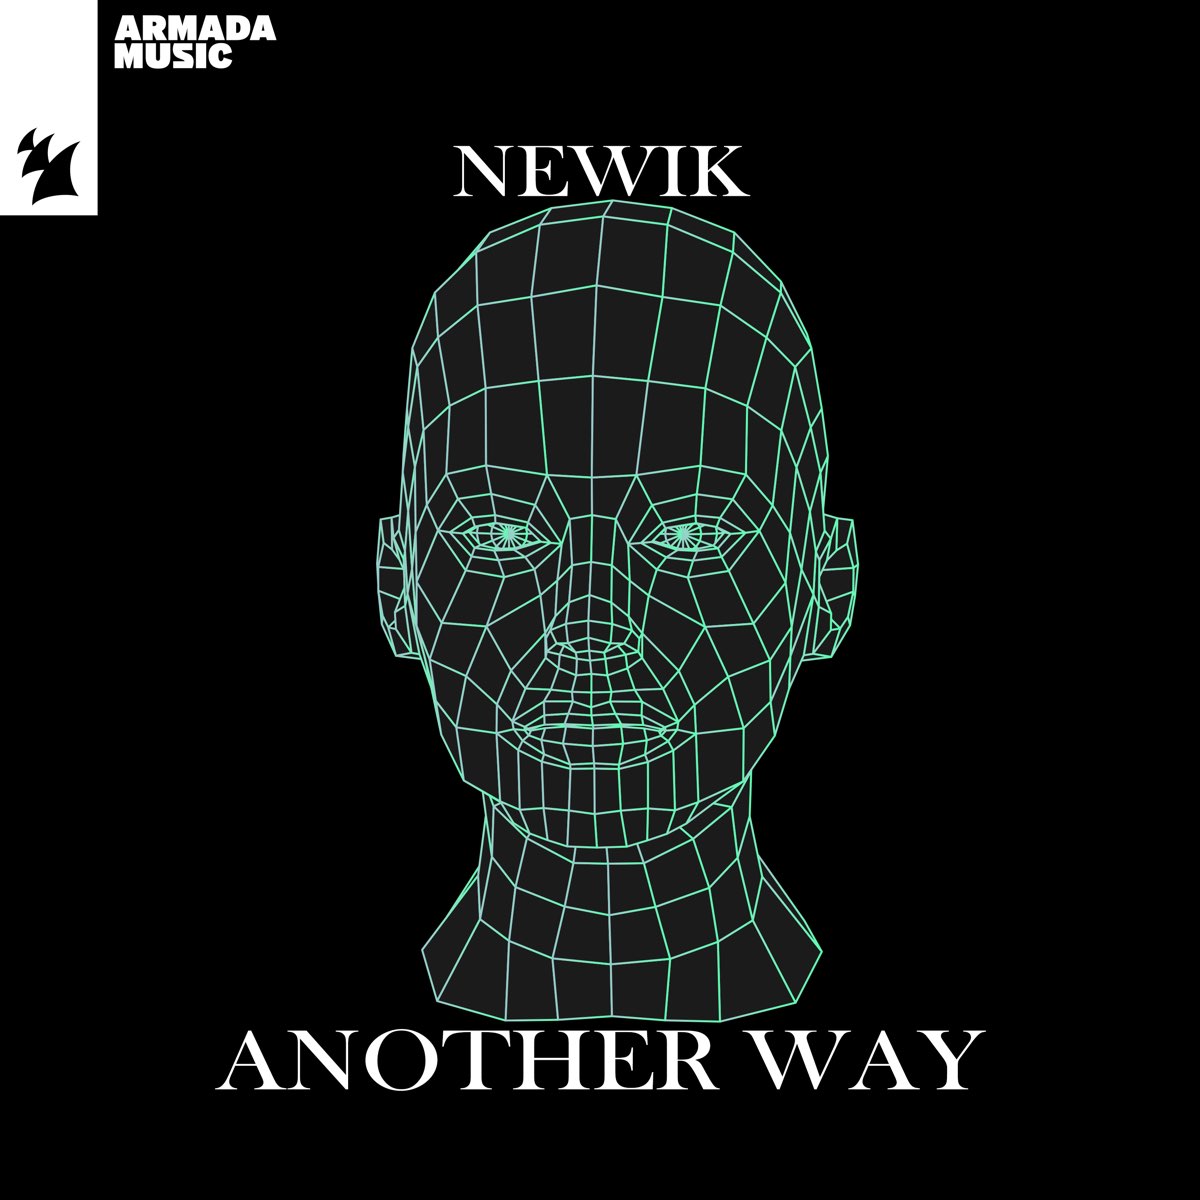 This another way. Live another way. Newiks. Newik formattree.